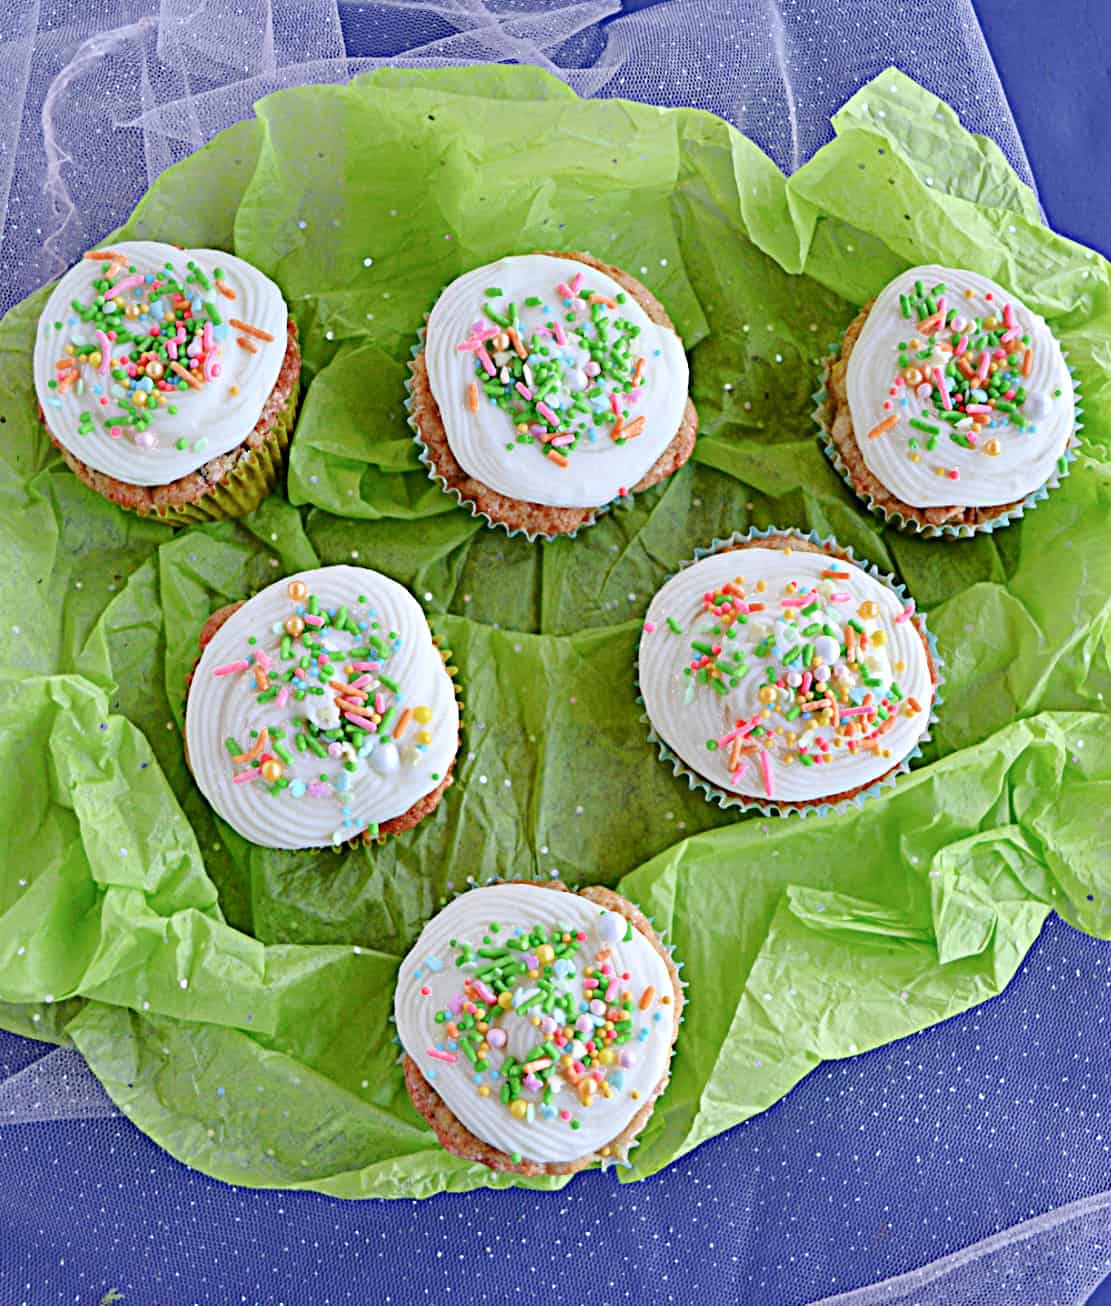 A pile of carrot cake cupcakes topped with cream cheese frosting and sprinkles on a green background.